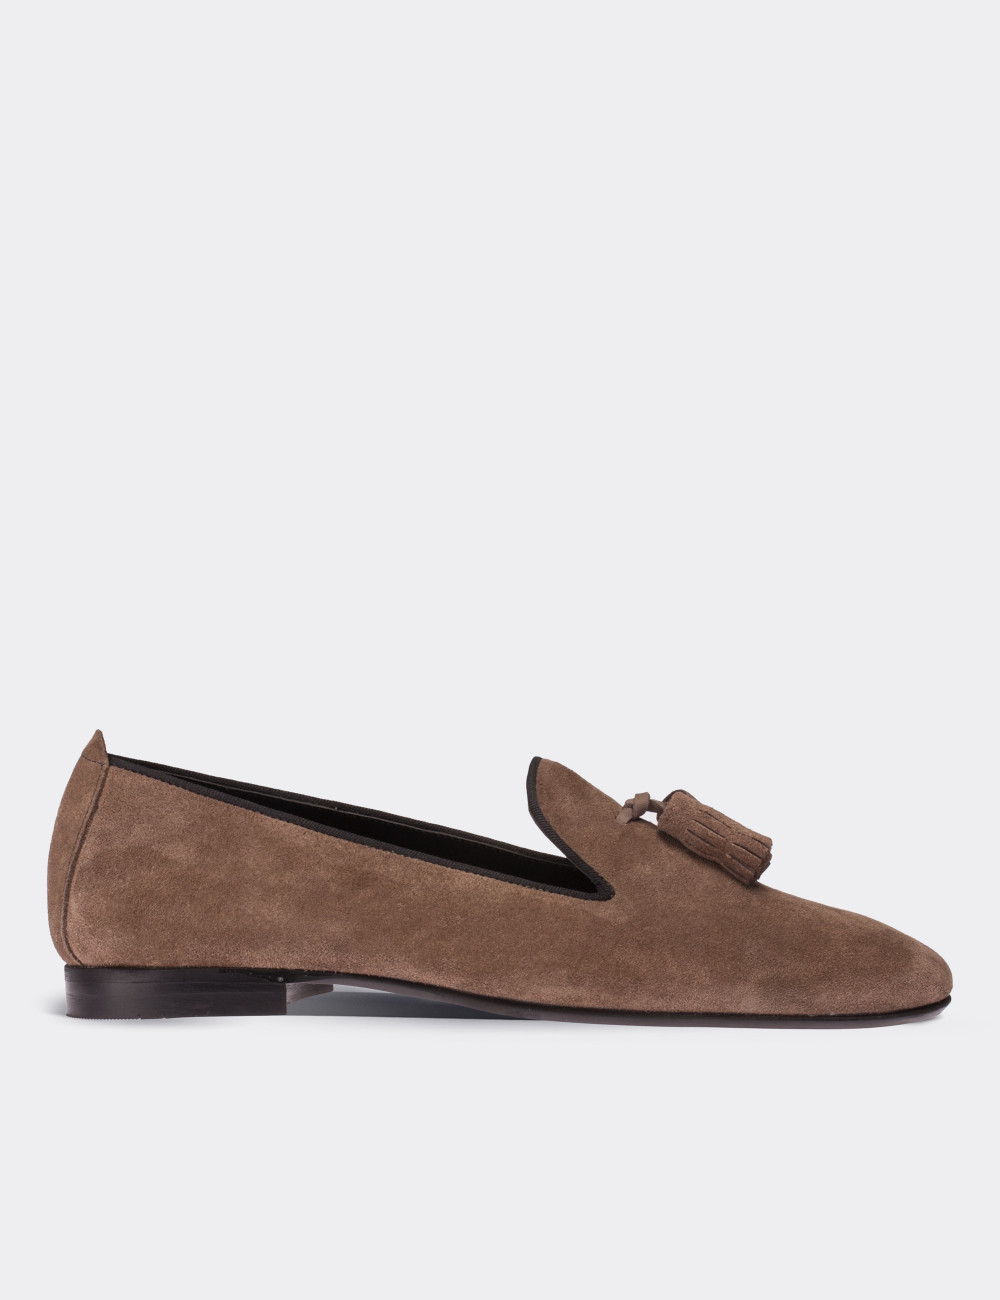 Sandstone Suede Leather Loafers - 01613ZVZNM01